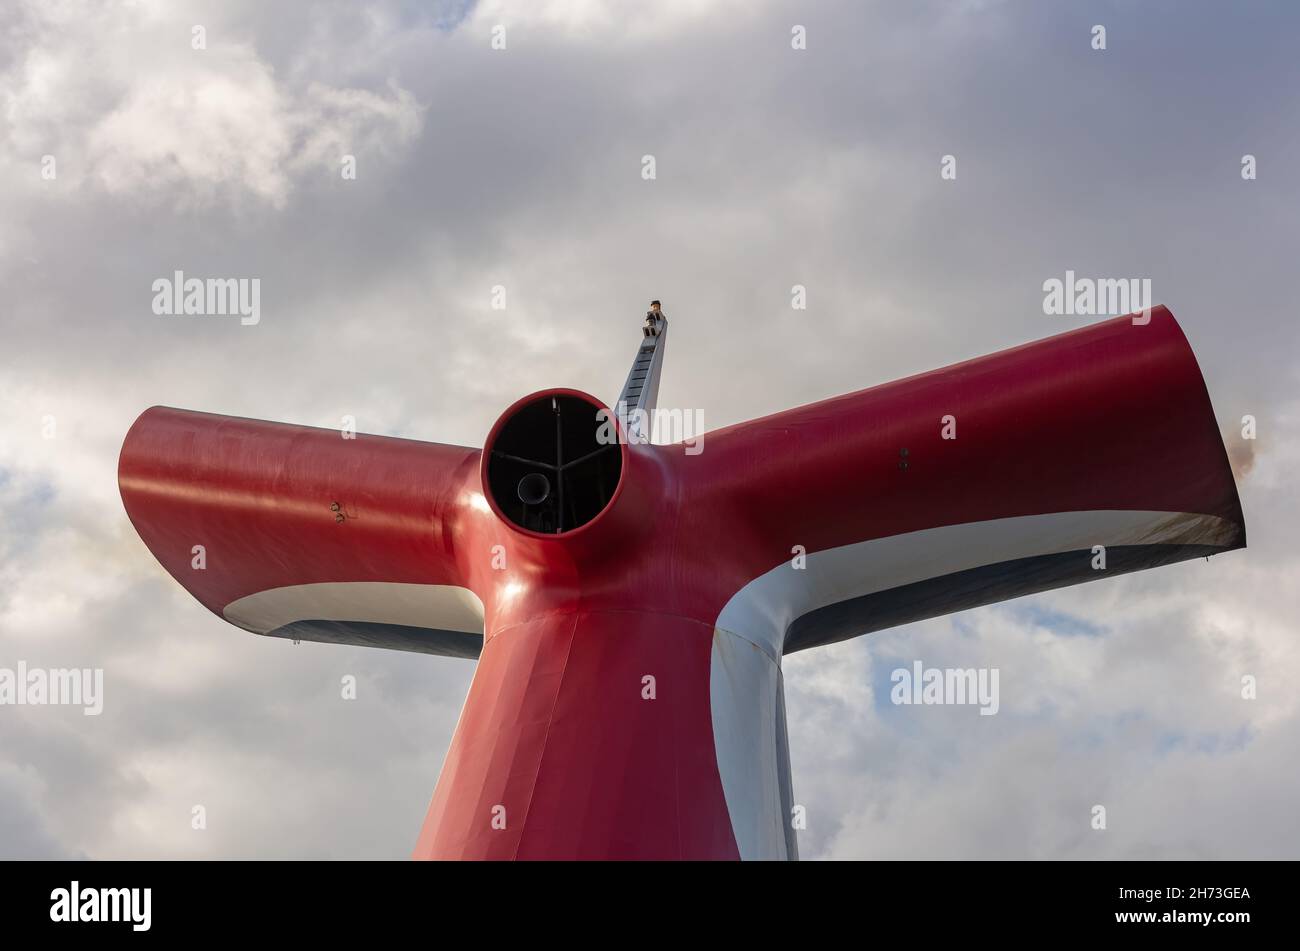 Saint Vincent - May 13, 2020: Low angle shot of red, white, and blue funnel on Carnival Freedom. Grey sky with white clouds in the background, Stock Photo